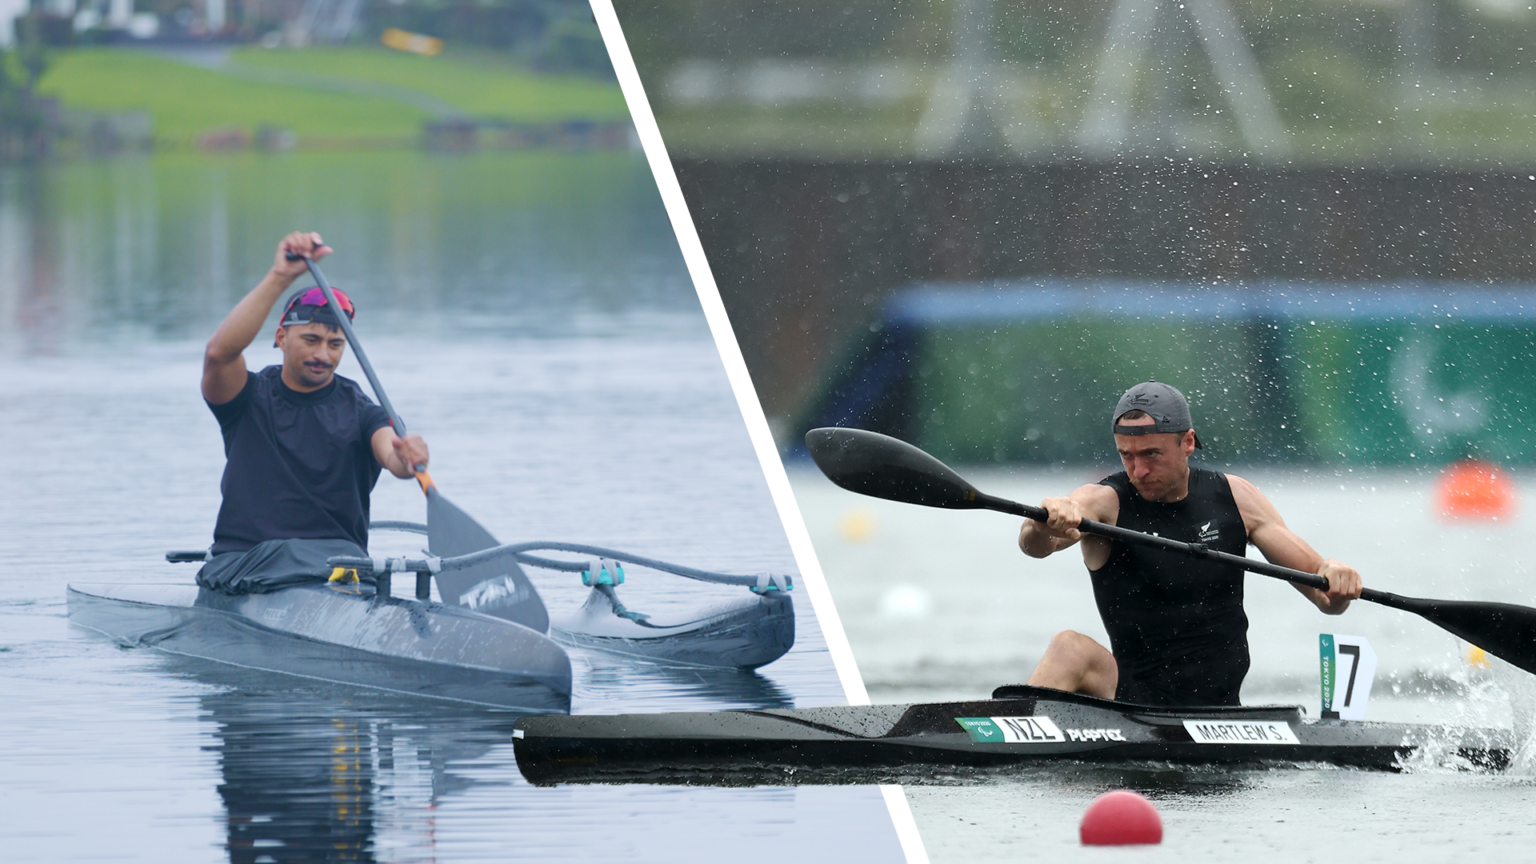 Peter Cowan (left) paddles his canoe. Scott Martlew (Right) paddles his canoe.